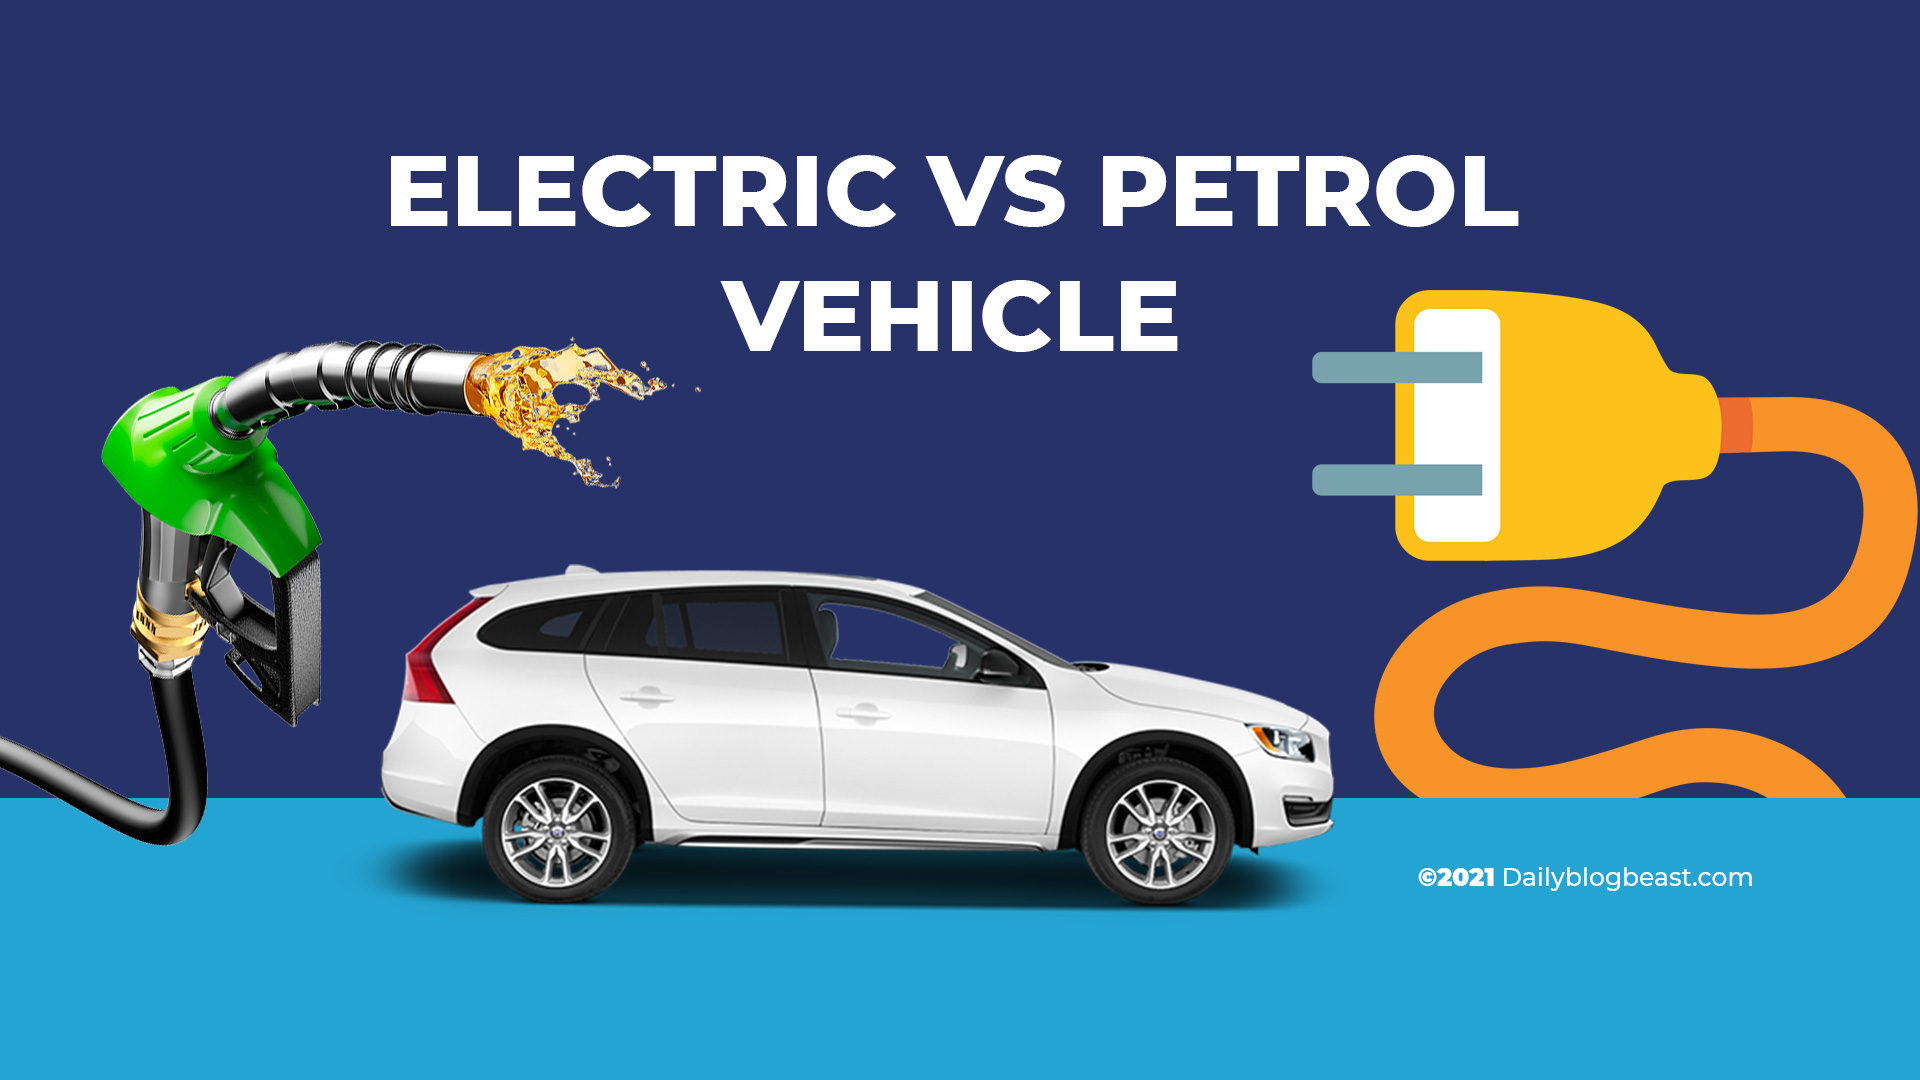 Future of Electric Vs Petrol Vehicle - Get Daily Updates On Business